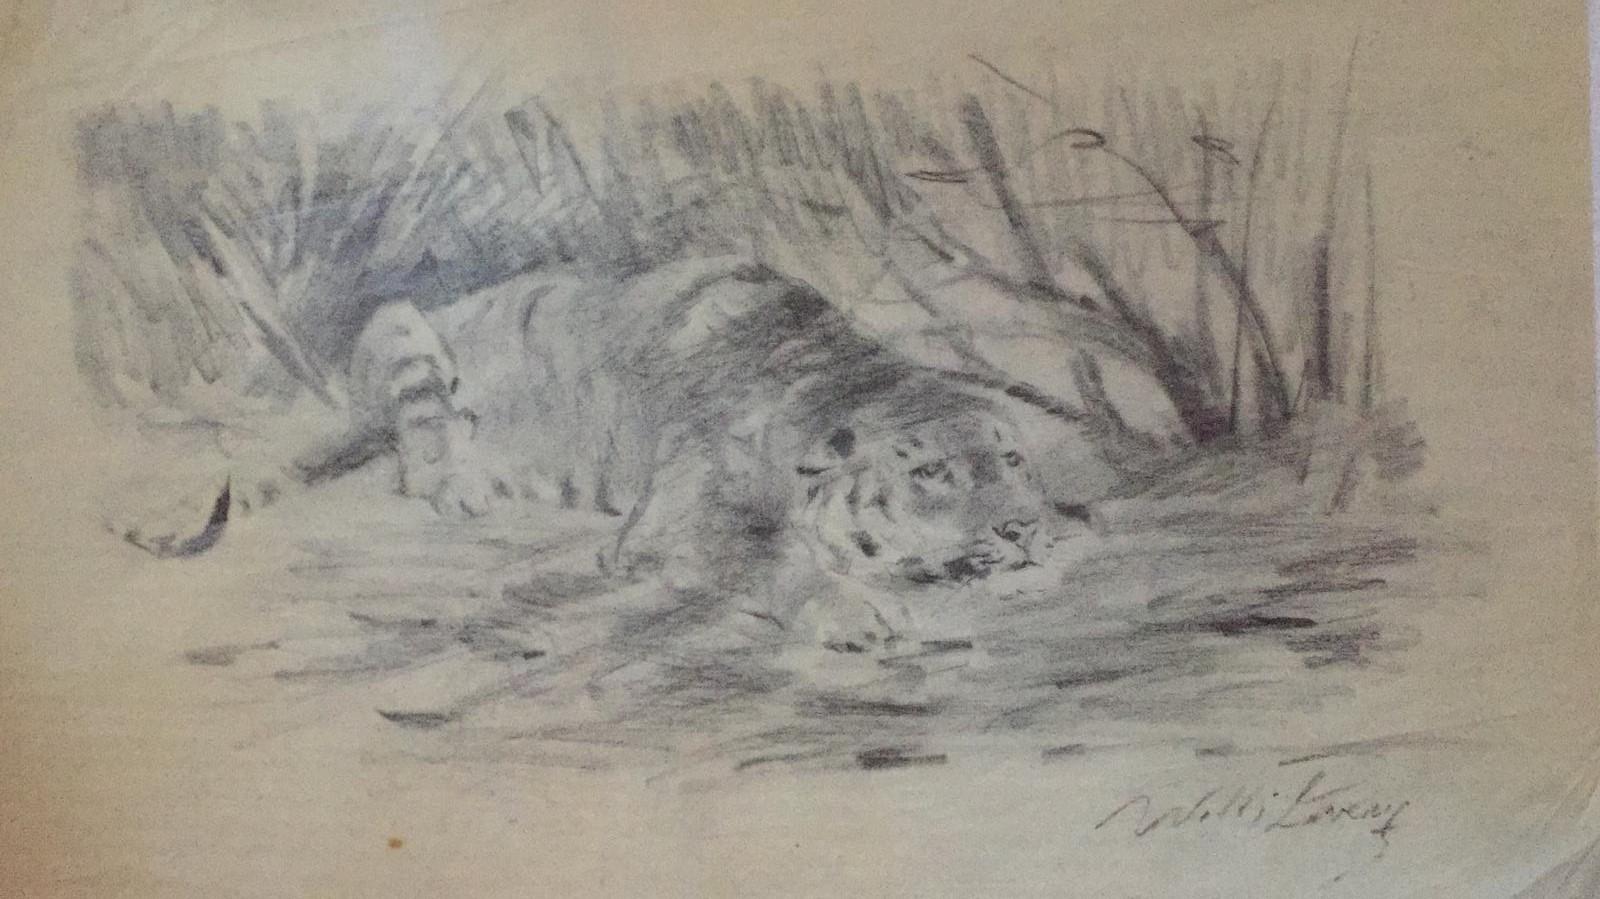 Tiger at rest is a beautiful original drawing on sketch paper realized in the XX century by the German artist Wilhelm Lorenz, also known as Willi Lorenz. 

This is a preparatory study representing a tiger at rest, made with fresh lines and a sure